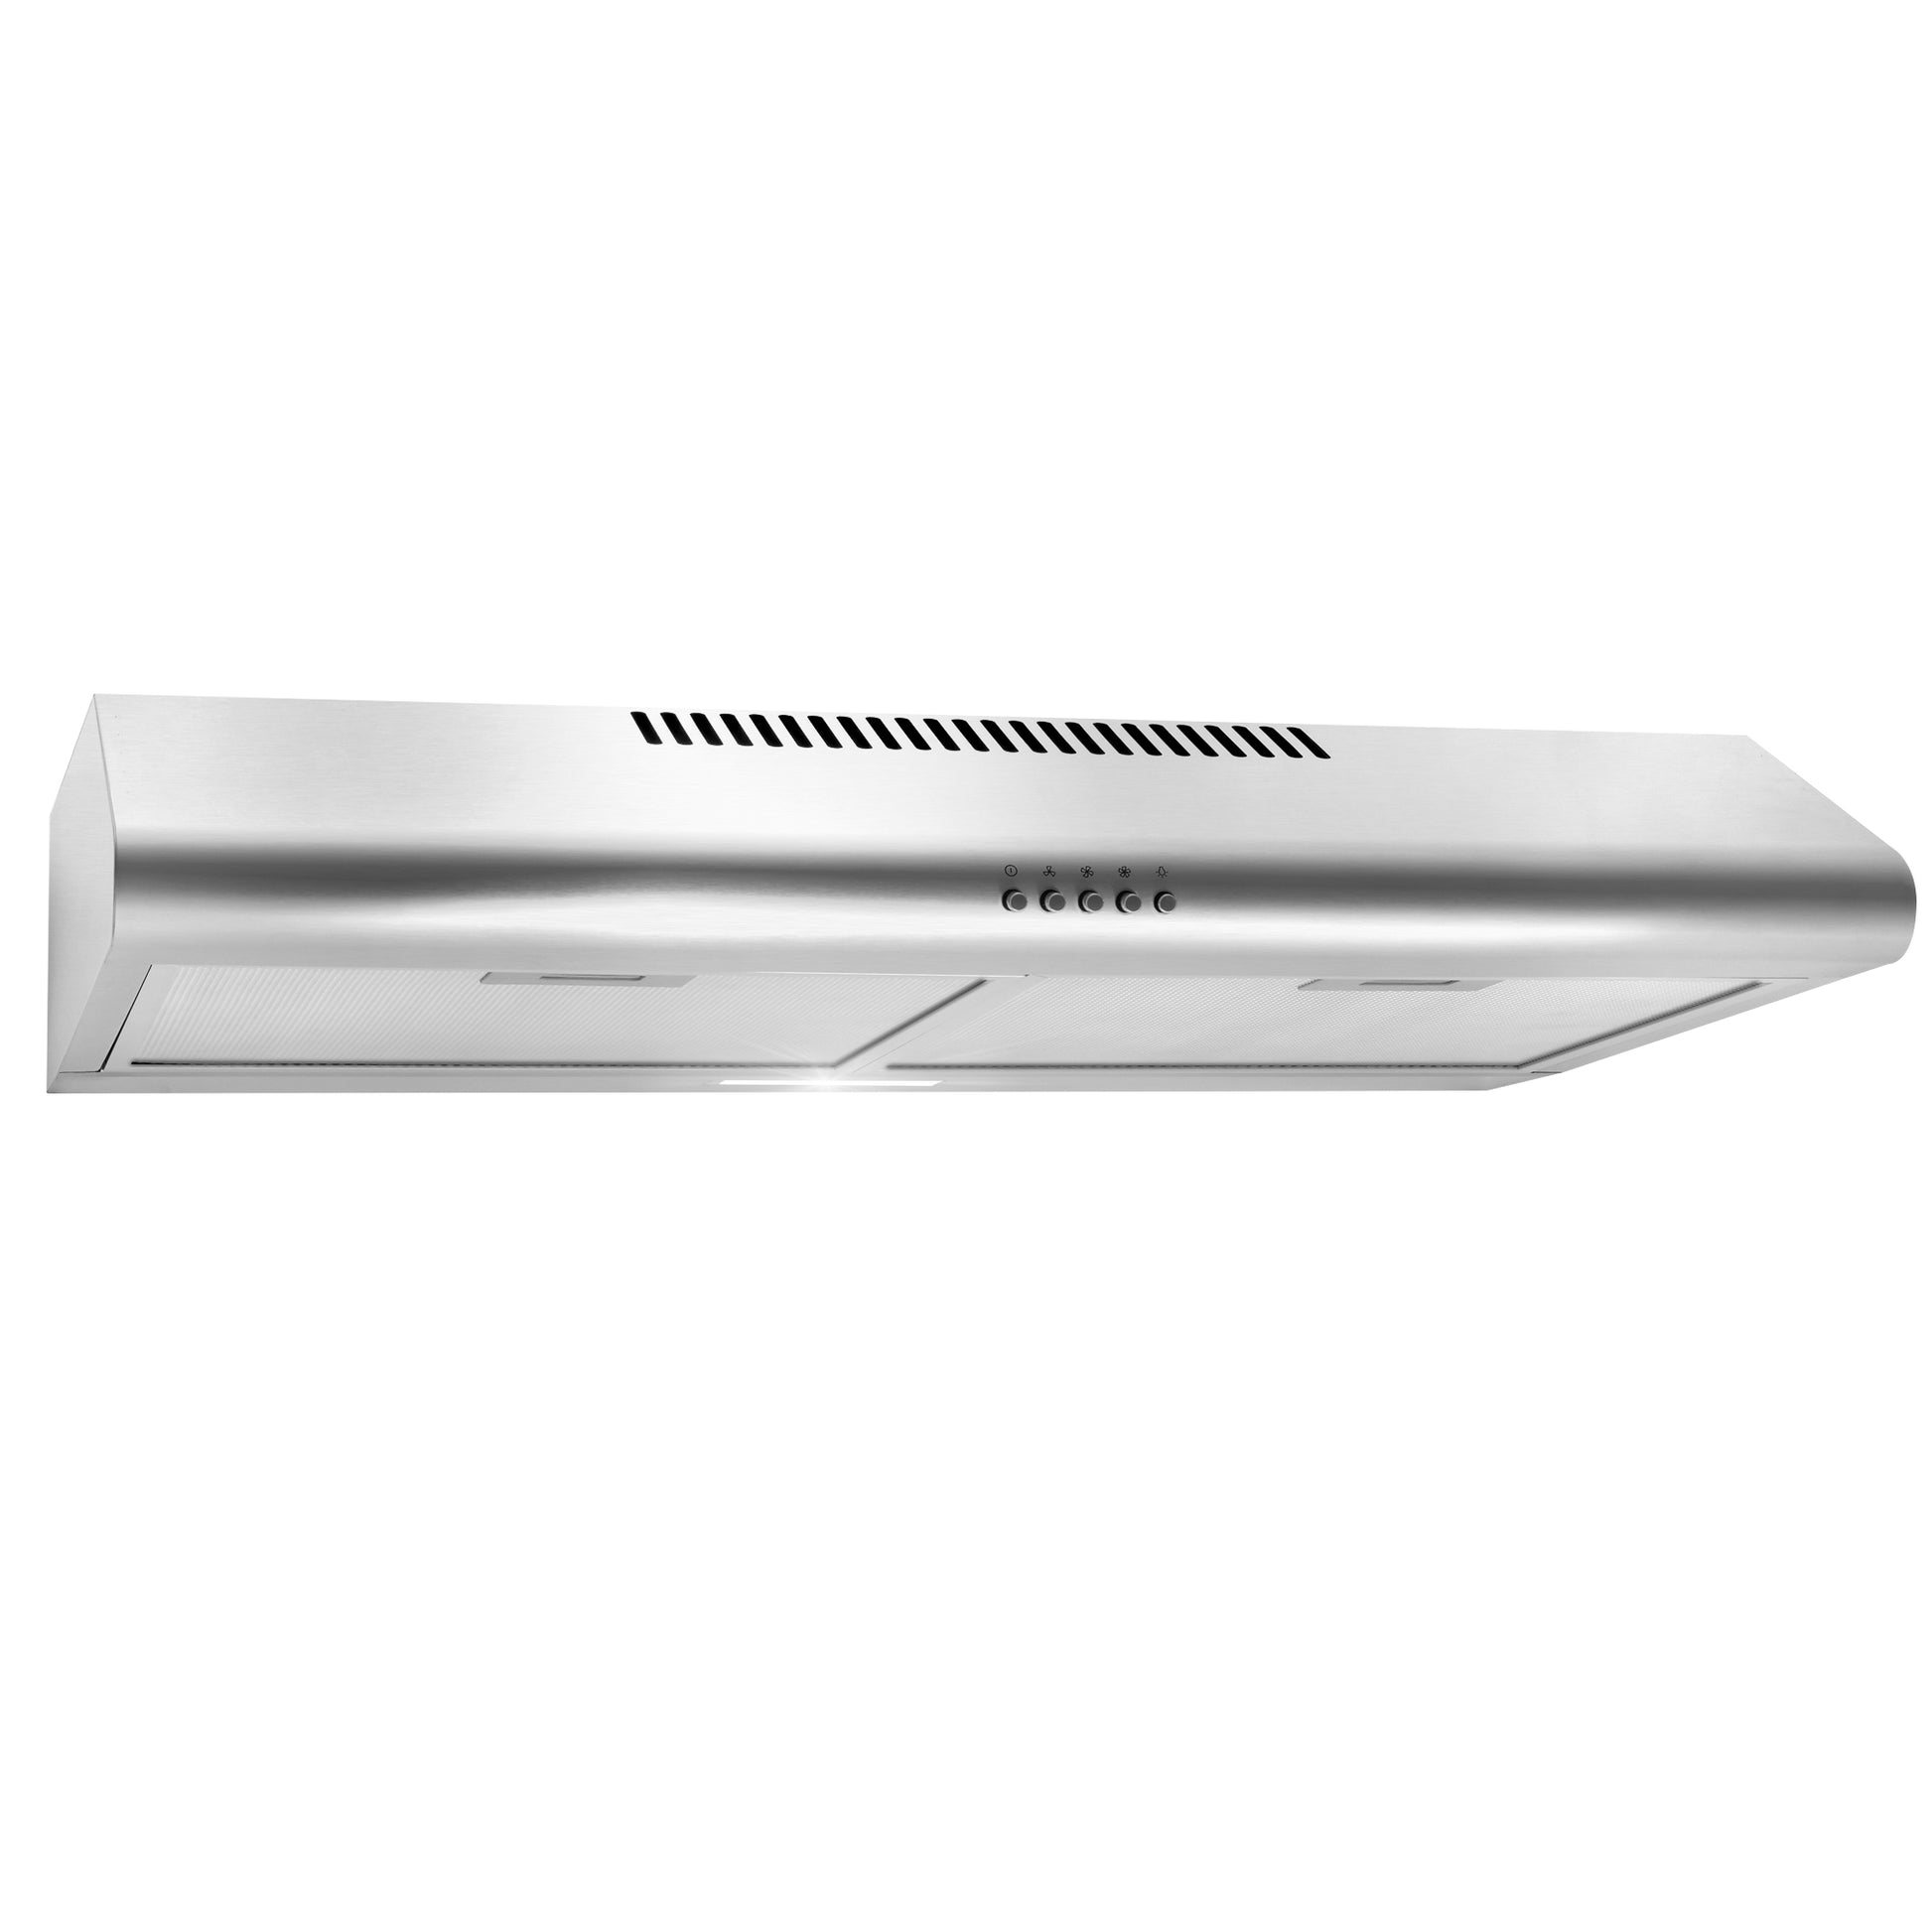 Cosmo 5MU30 30 in. Stainless Steel Under Cabinet Range Hood with Ducted / Ductless Convertible Duct, Slim Kitchen Stove Vent